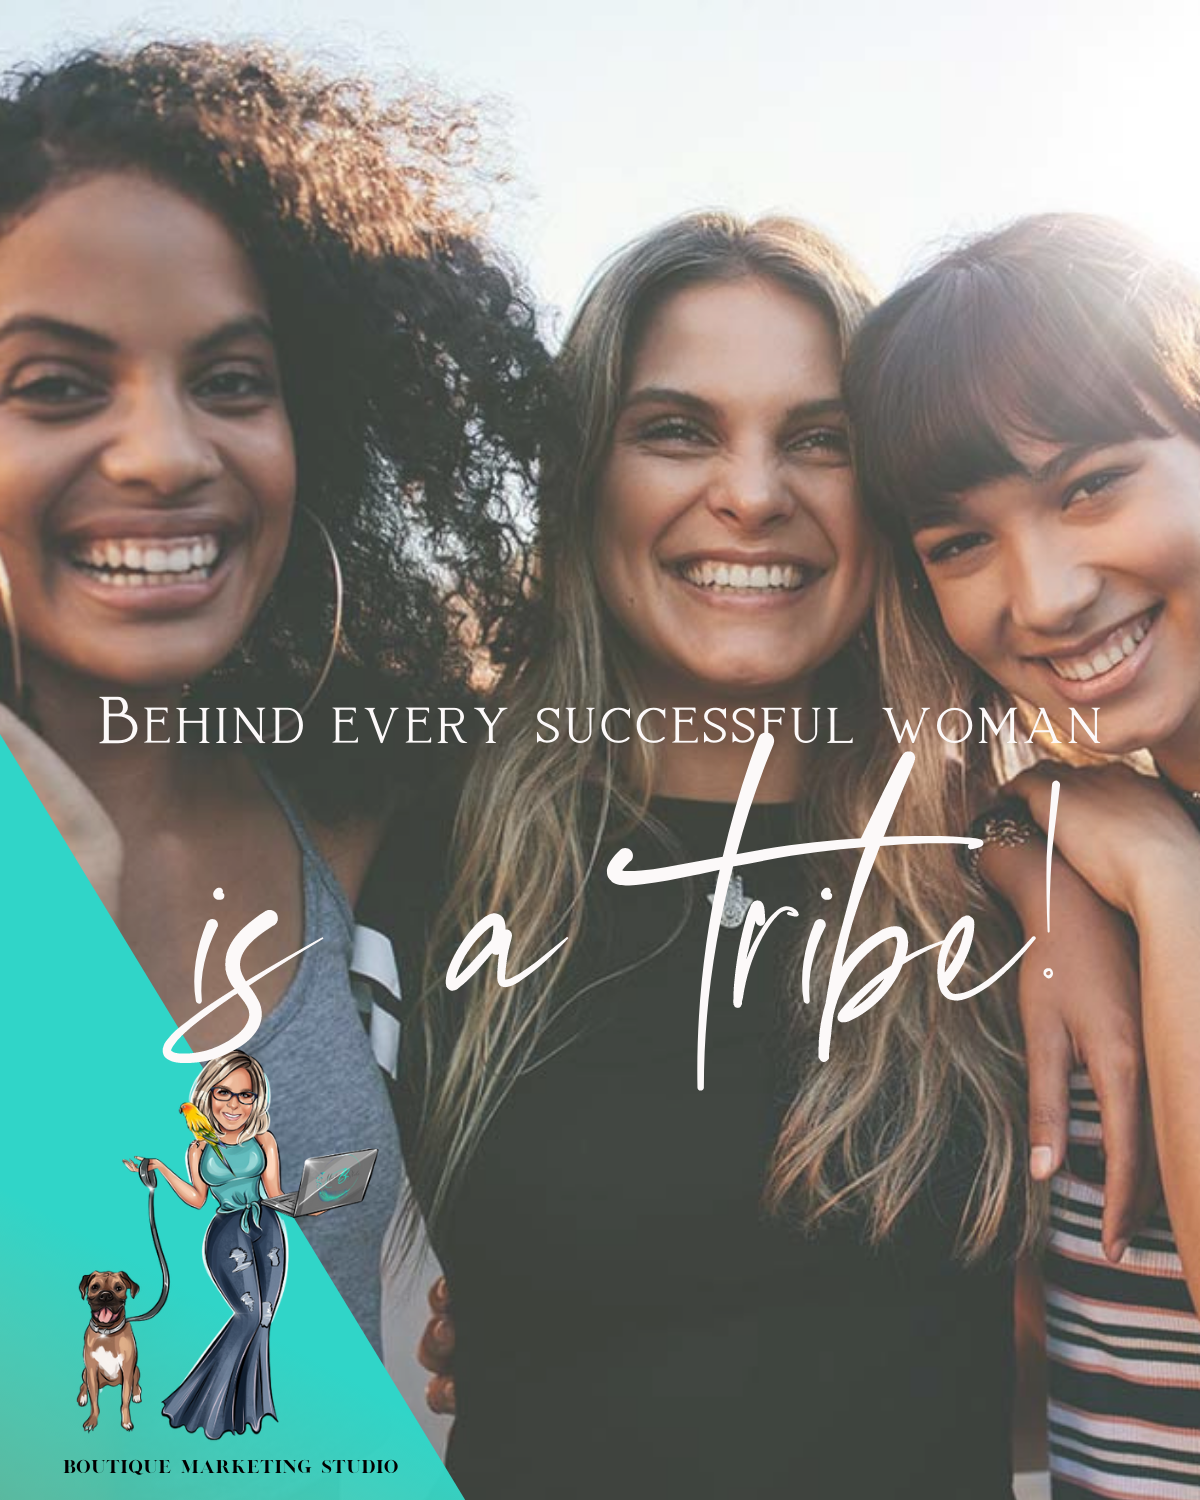 Behind every successful woman is a tribe.